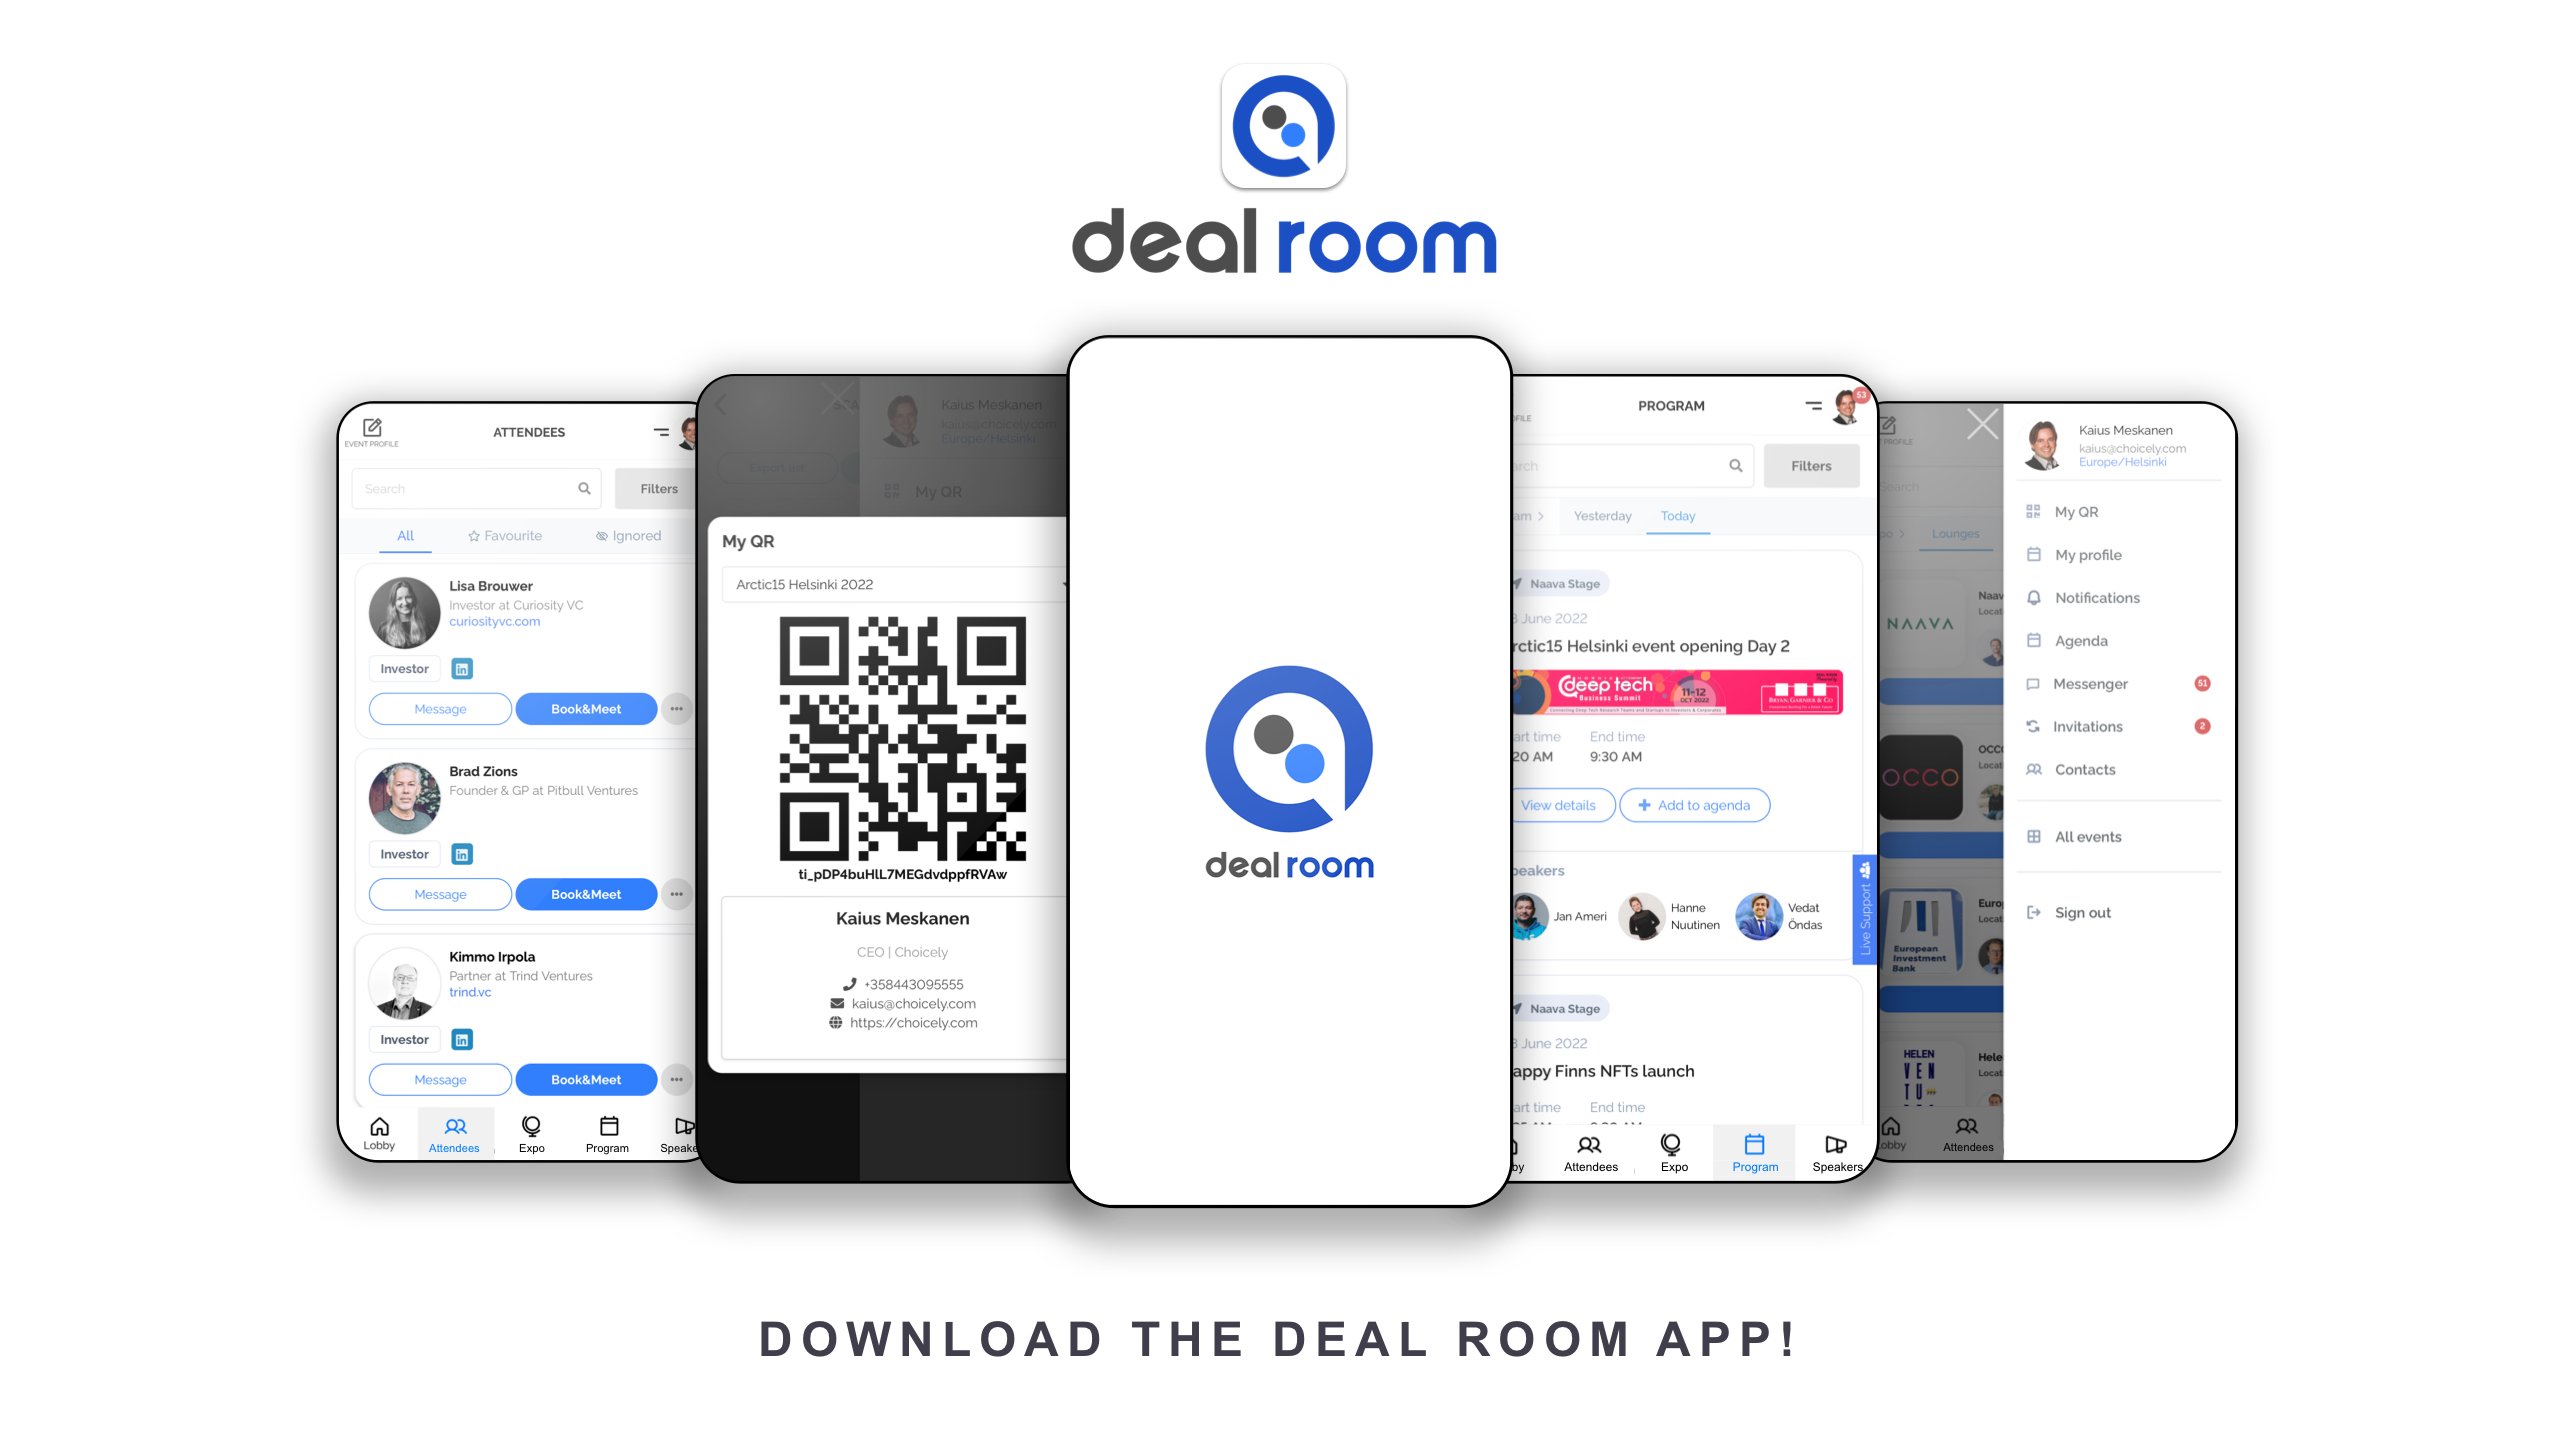 Phones with the Deal room app